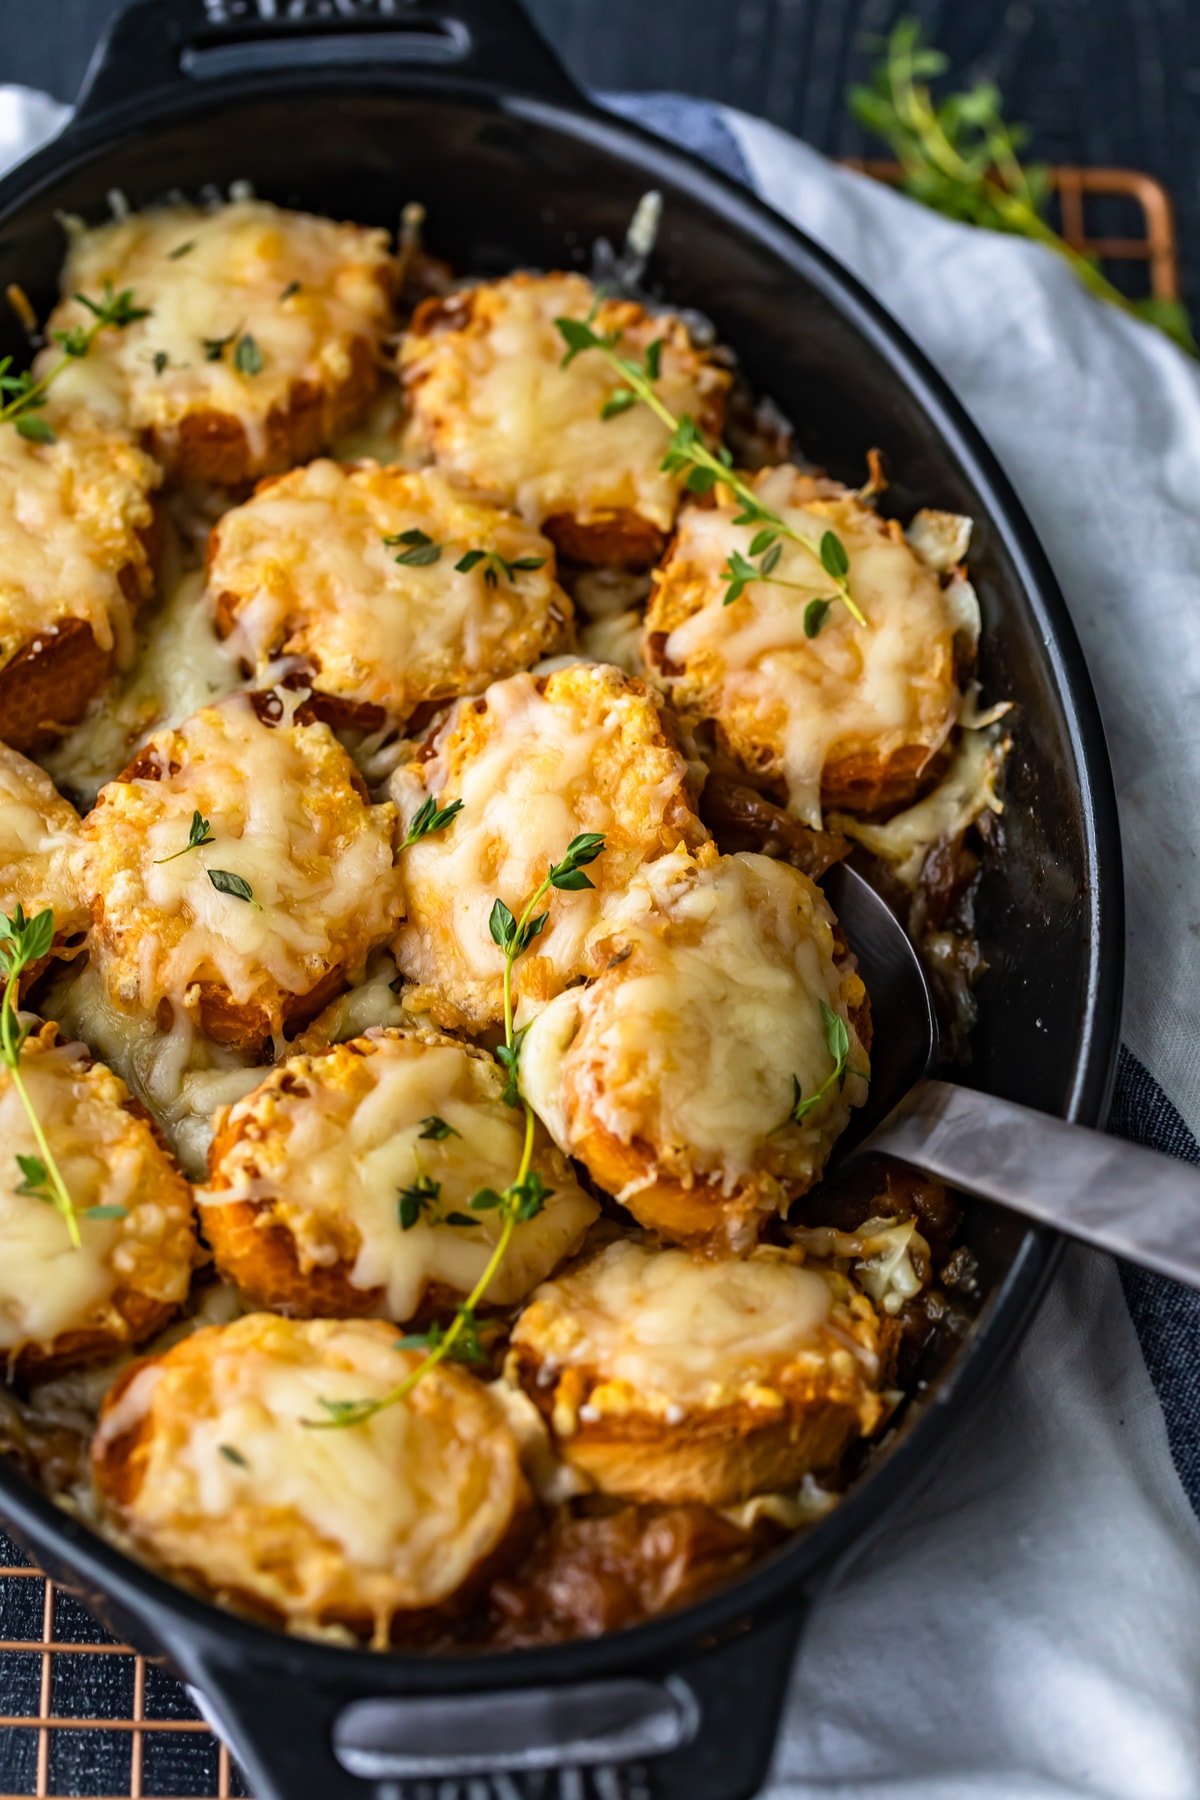 baguette slices topped with cheese and onions in a black baking dish